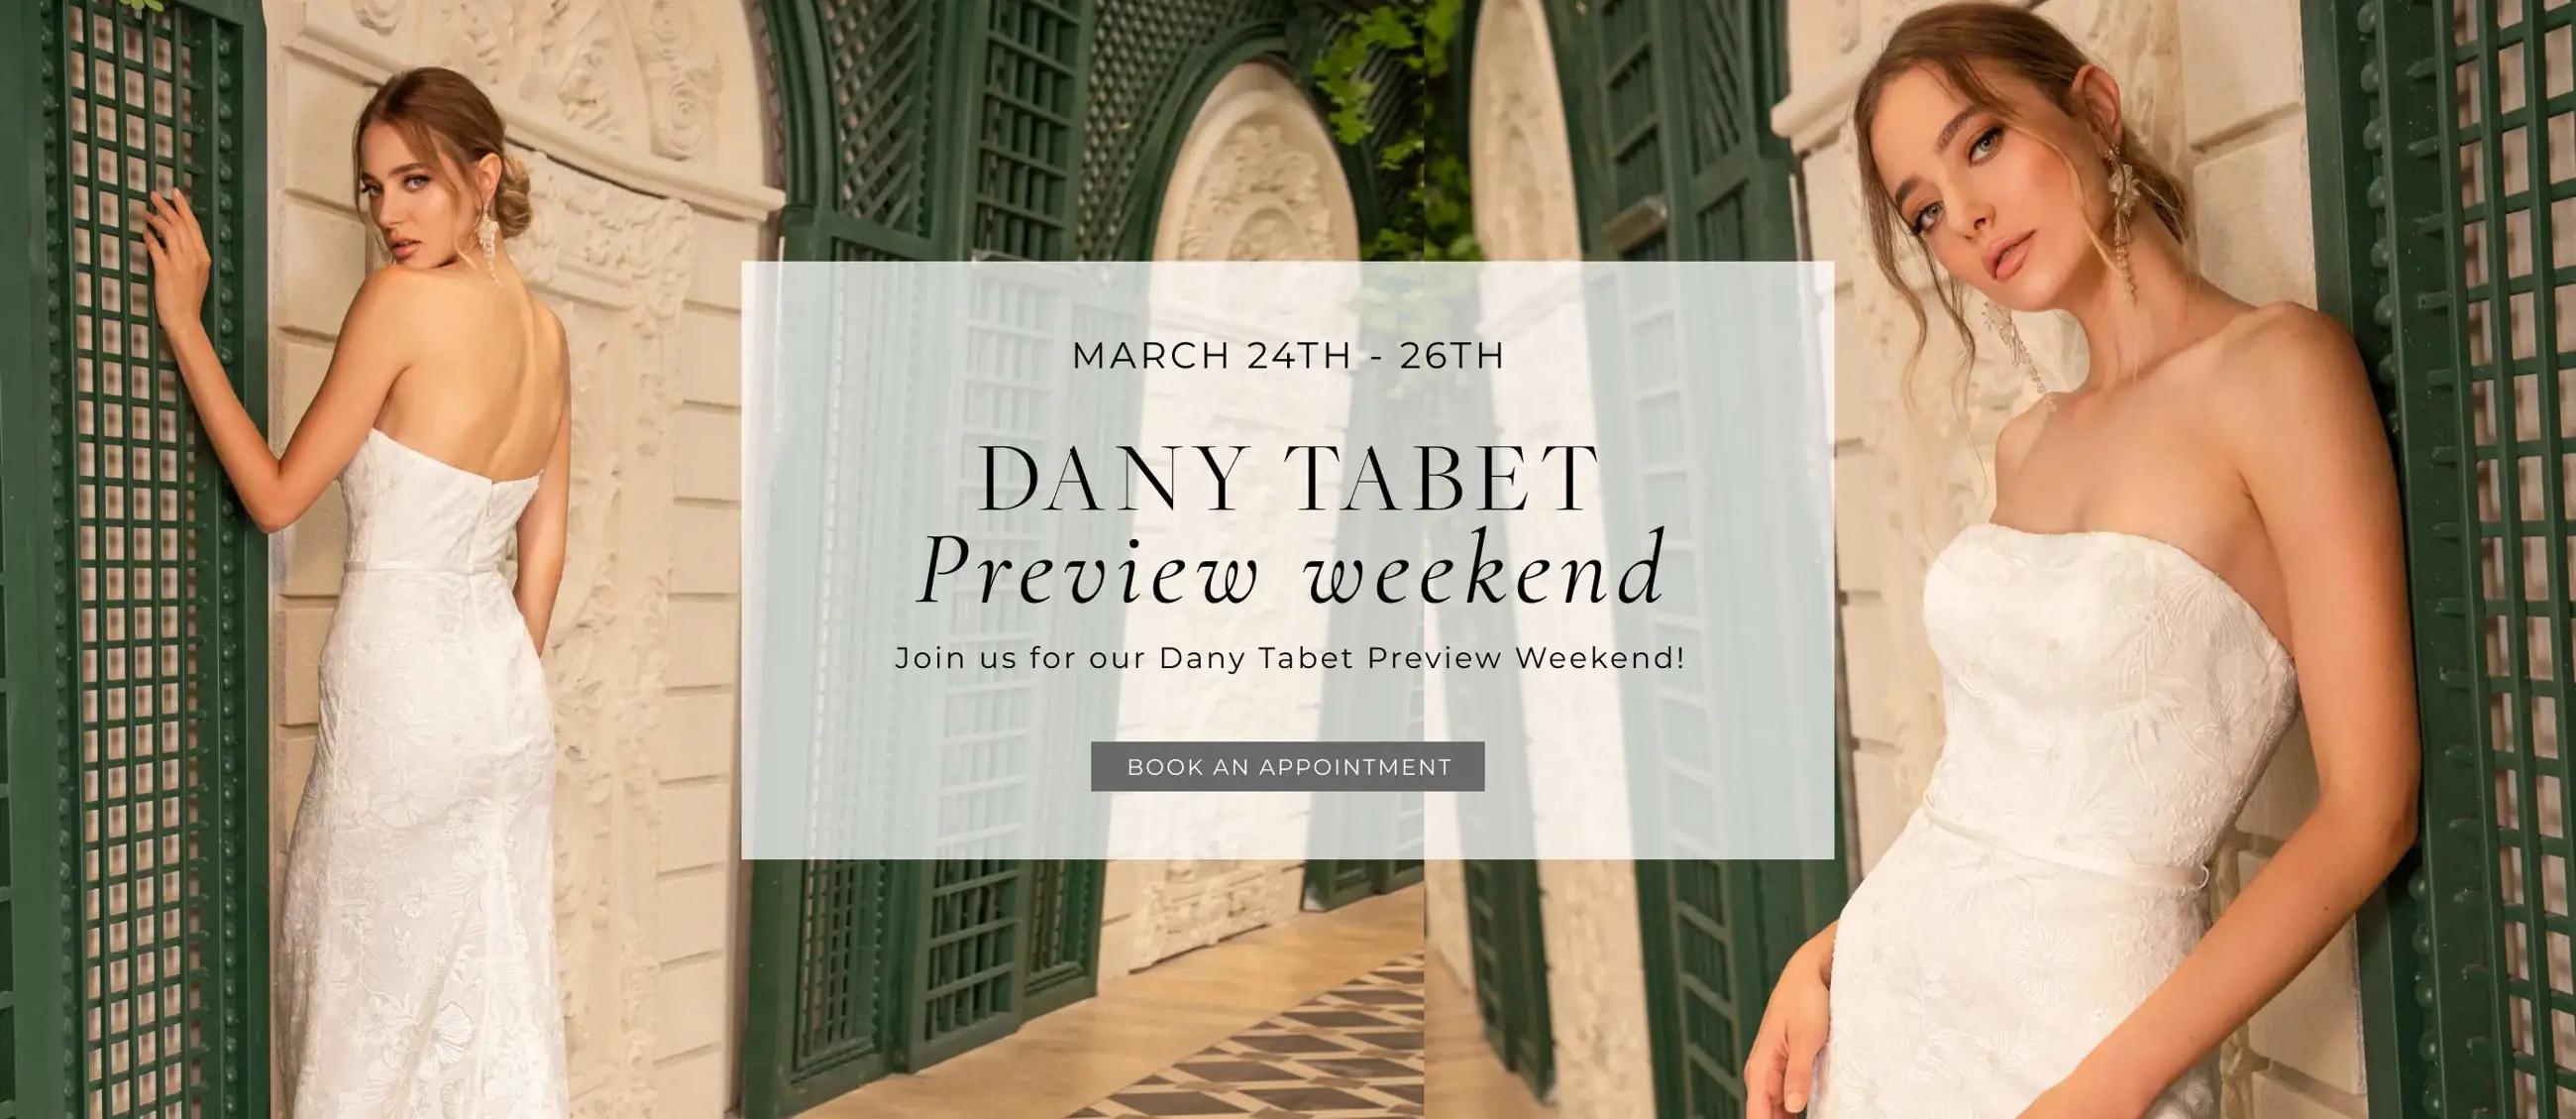 "Dany Tabet Preview Weekend" banner for desktop